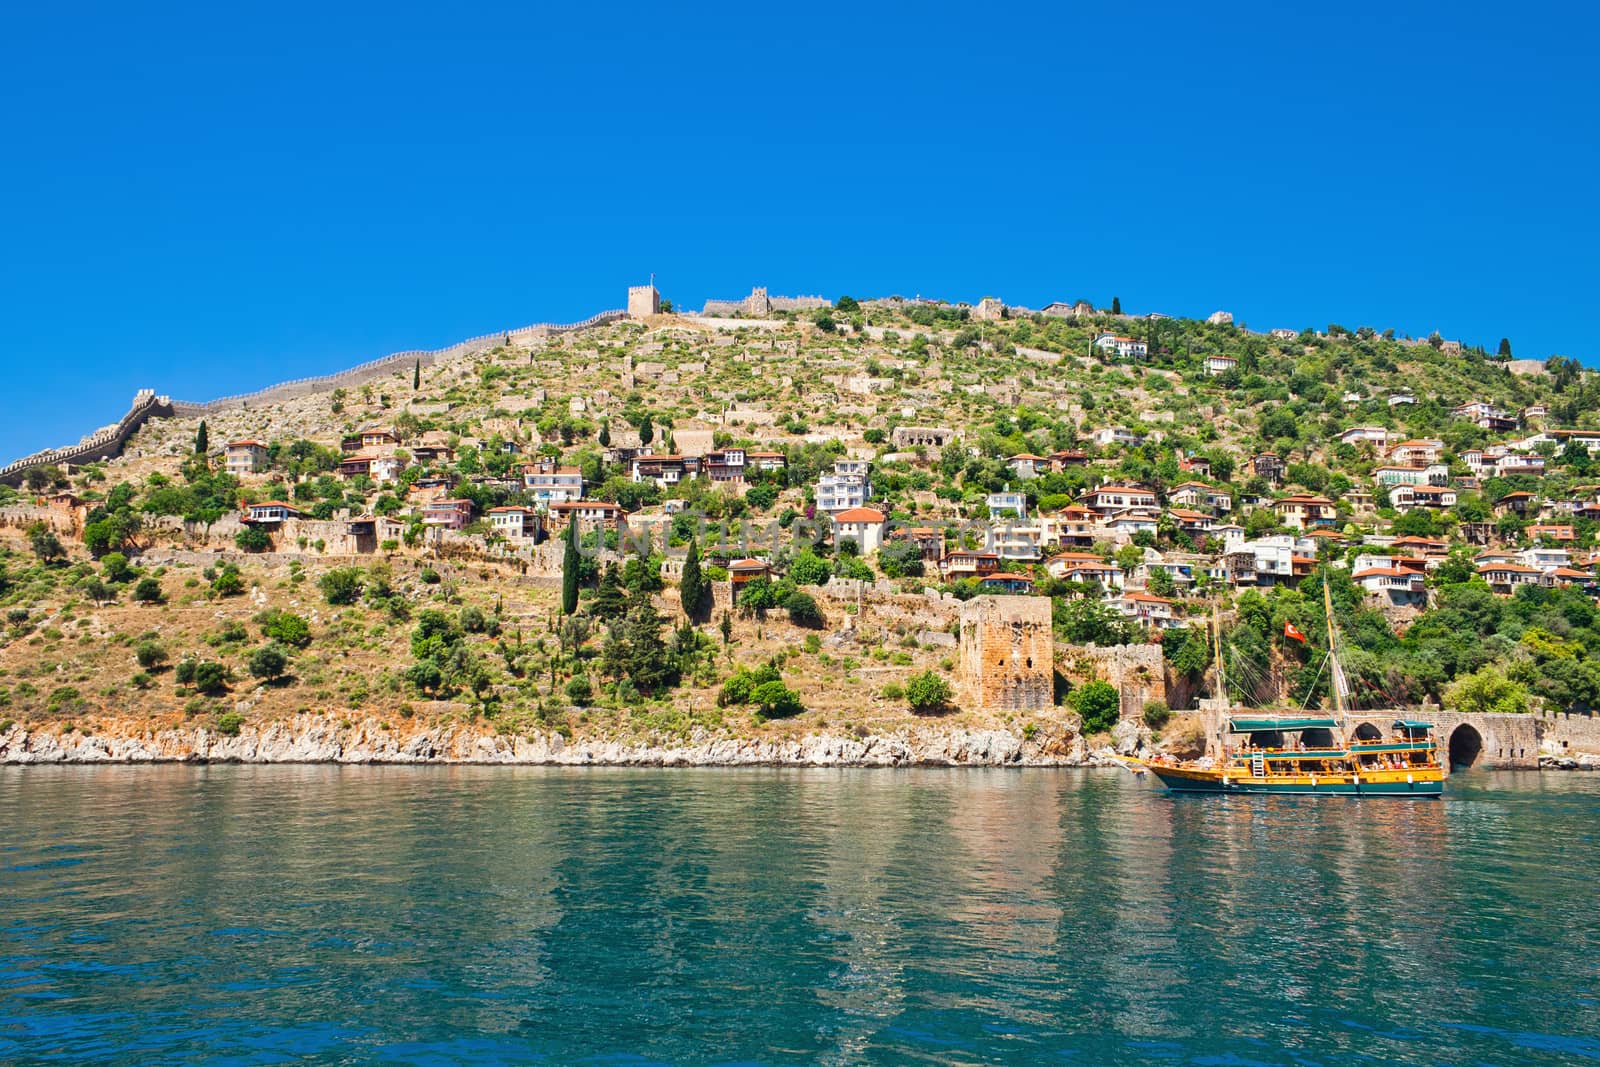 The city of Alanya. Turkish settlement in the Mediterranean sea.